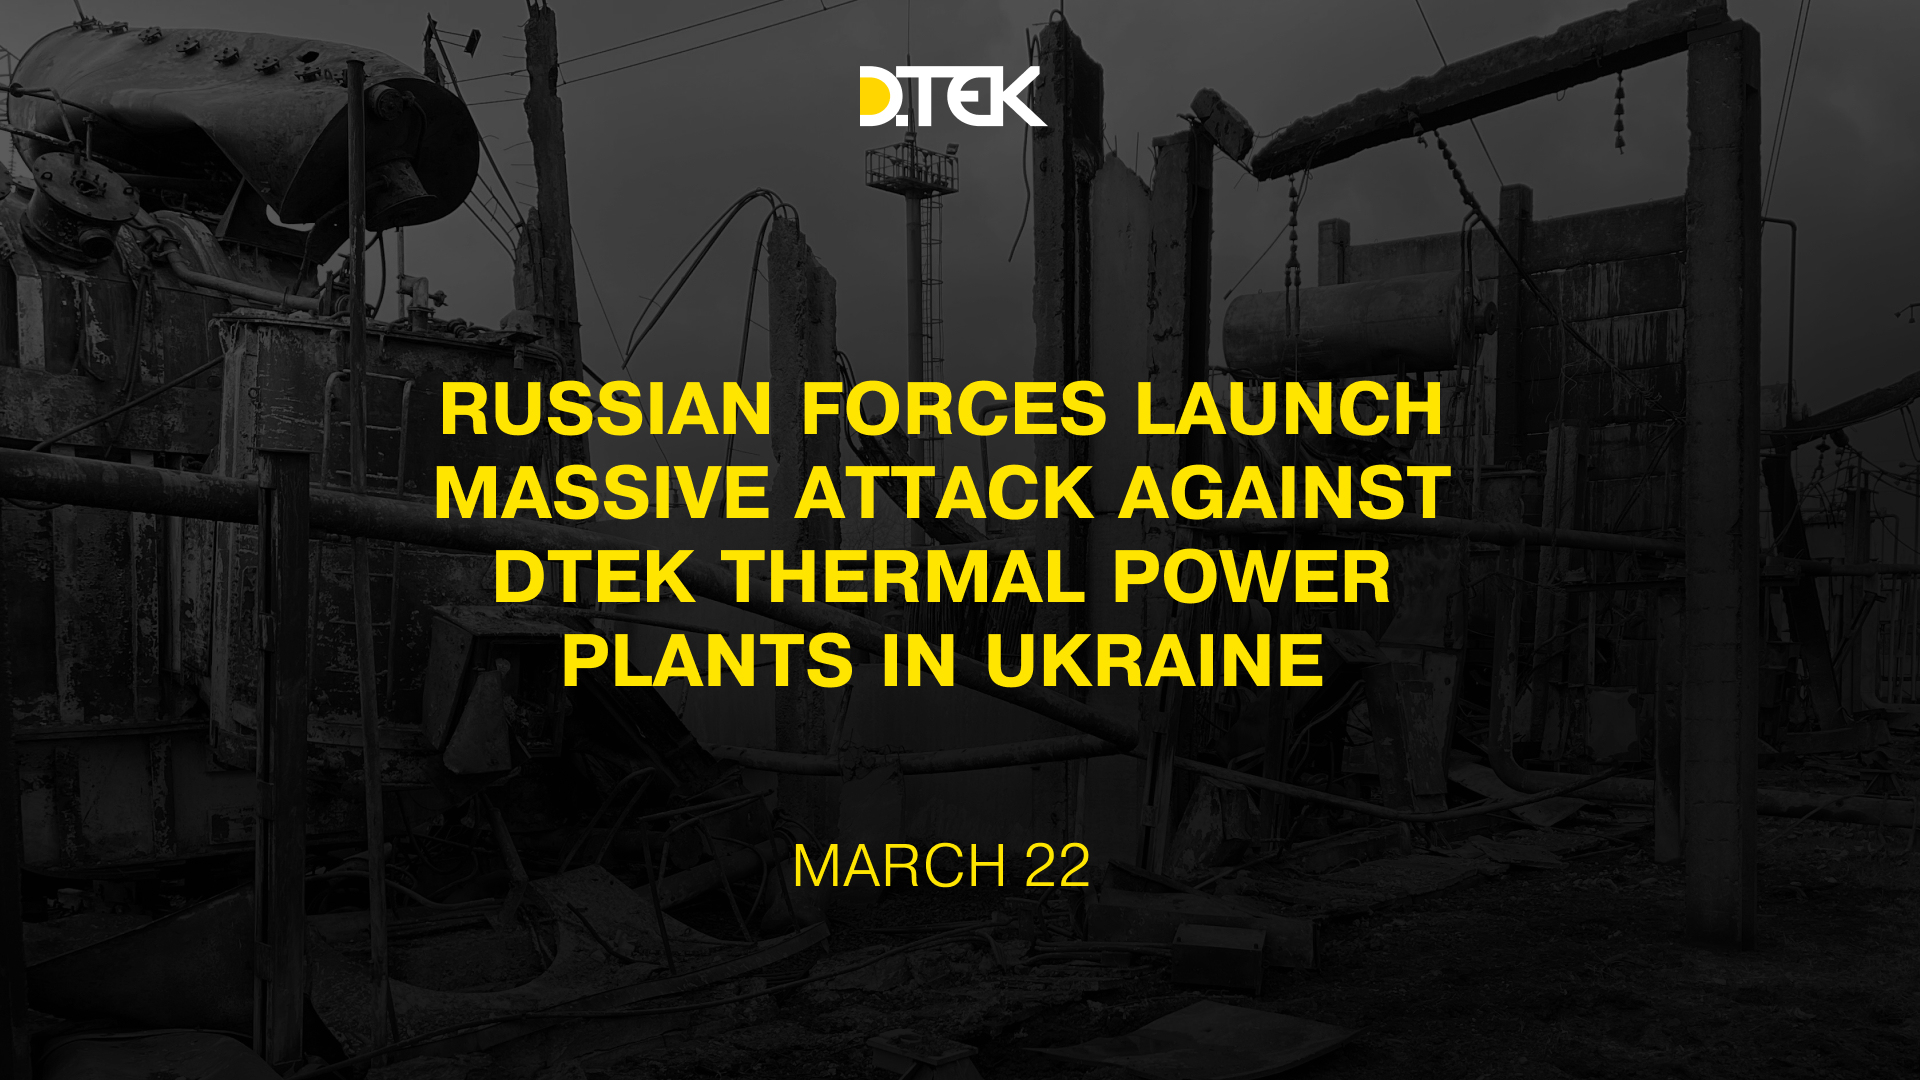 russian forces launch massive attack against DTEK thermal power plants in Ukraine